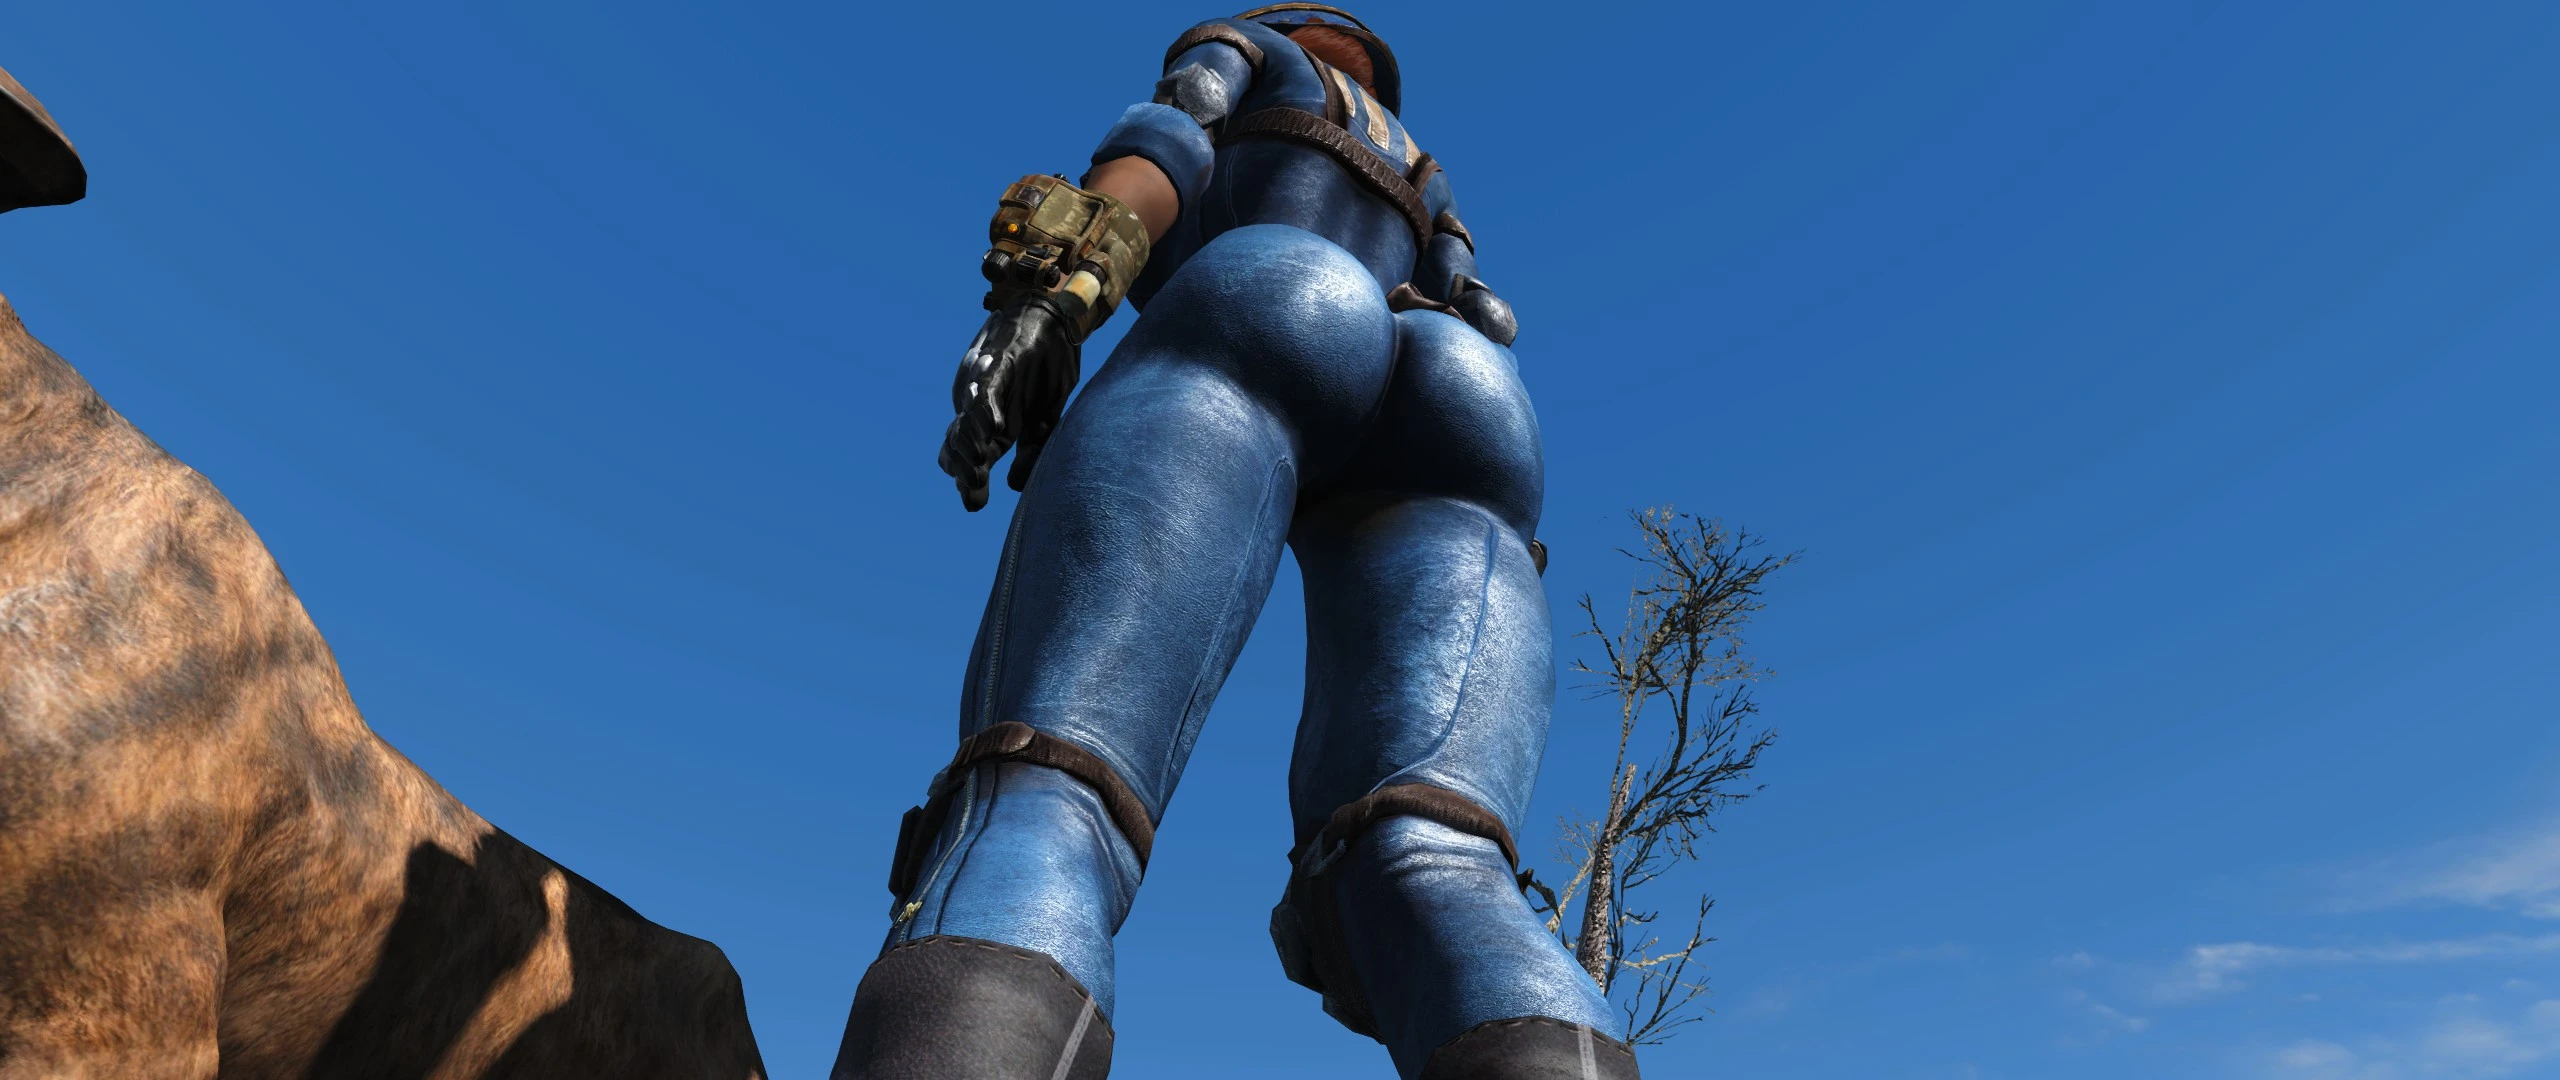 Slooty vault suit fallout 4 фото 16